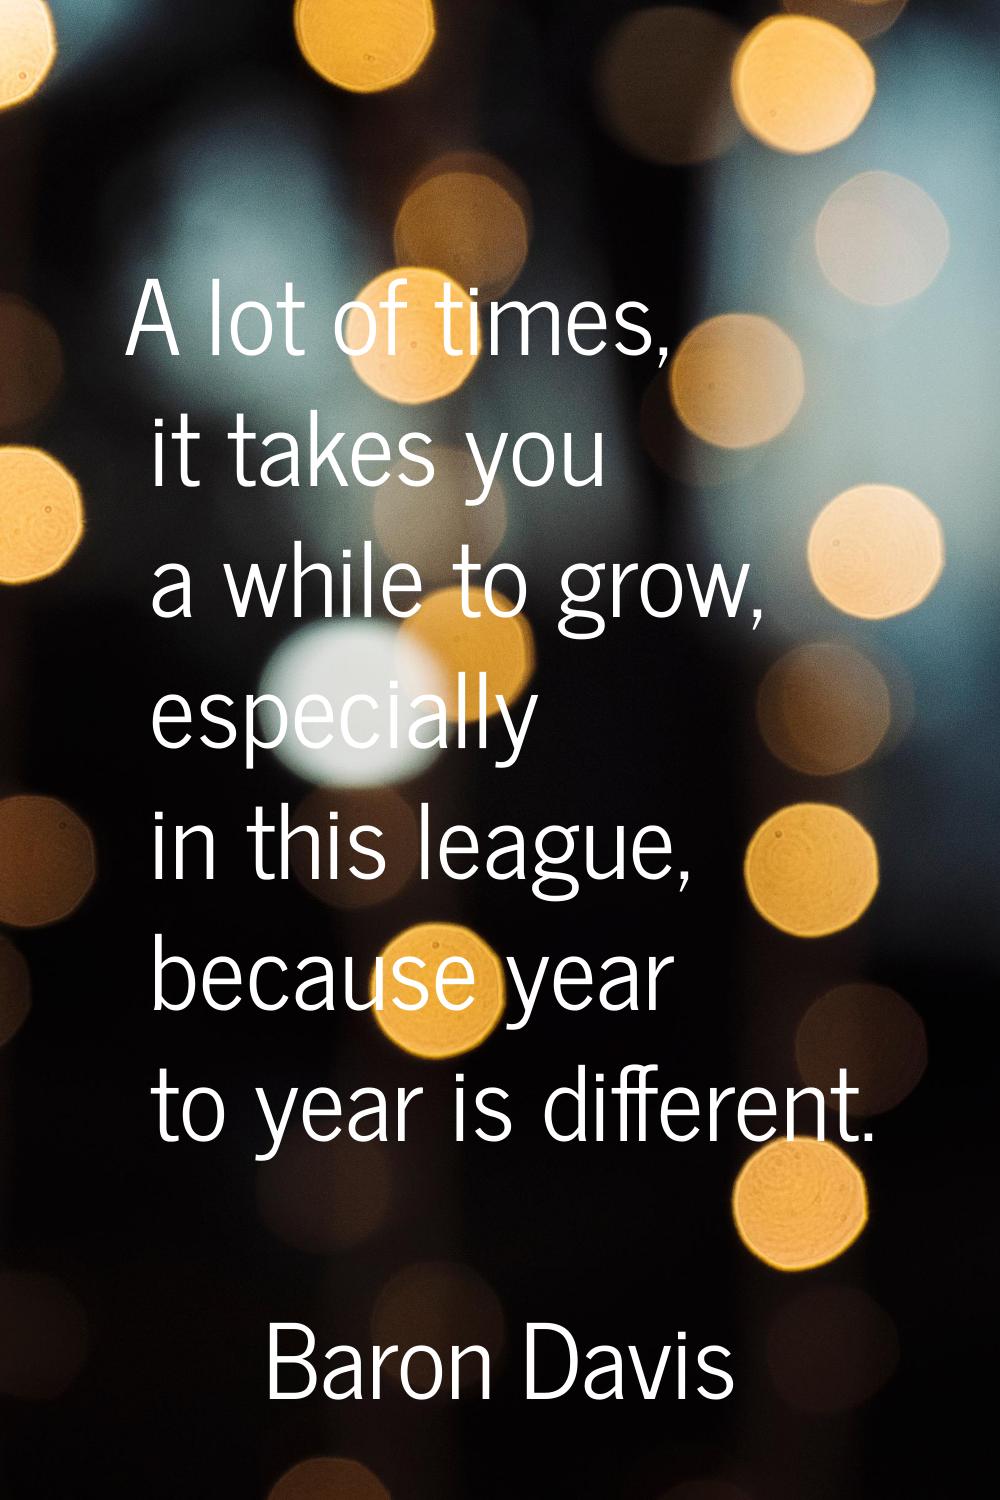 A lot of times, it takes you a while to grow, especially in this league, because year to year is di